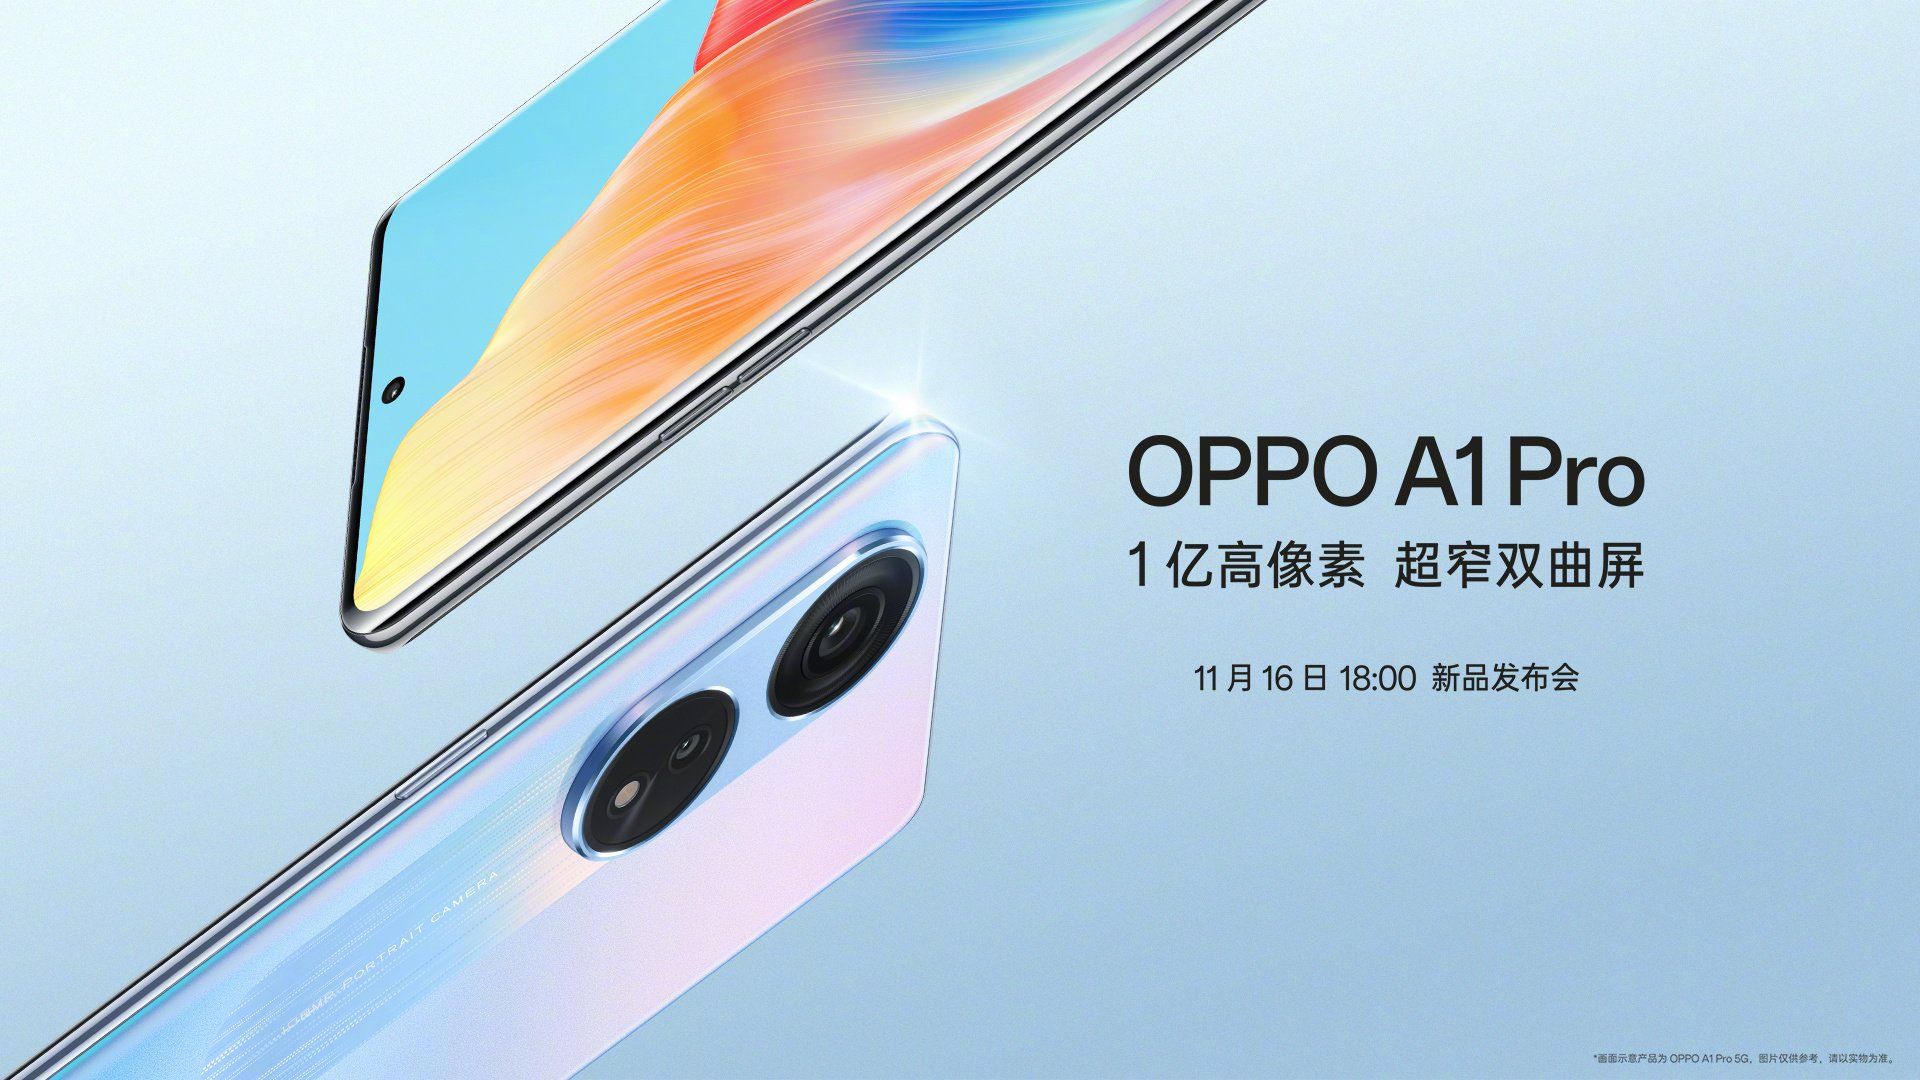 Oppo A1 Pro Launch Date Confirmed, Design Revealed - Gizmochina